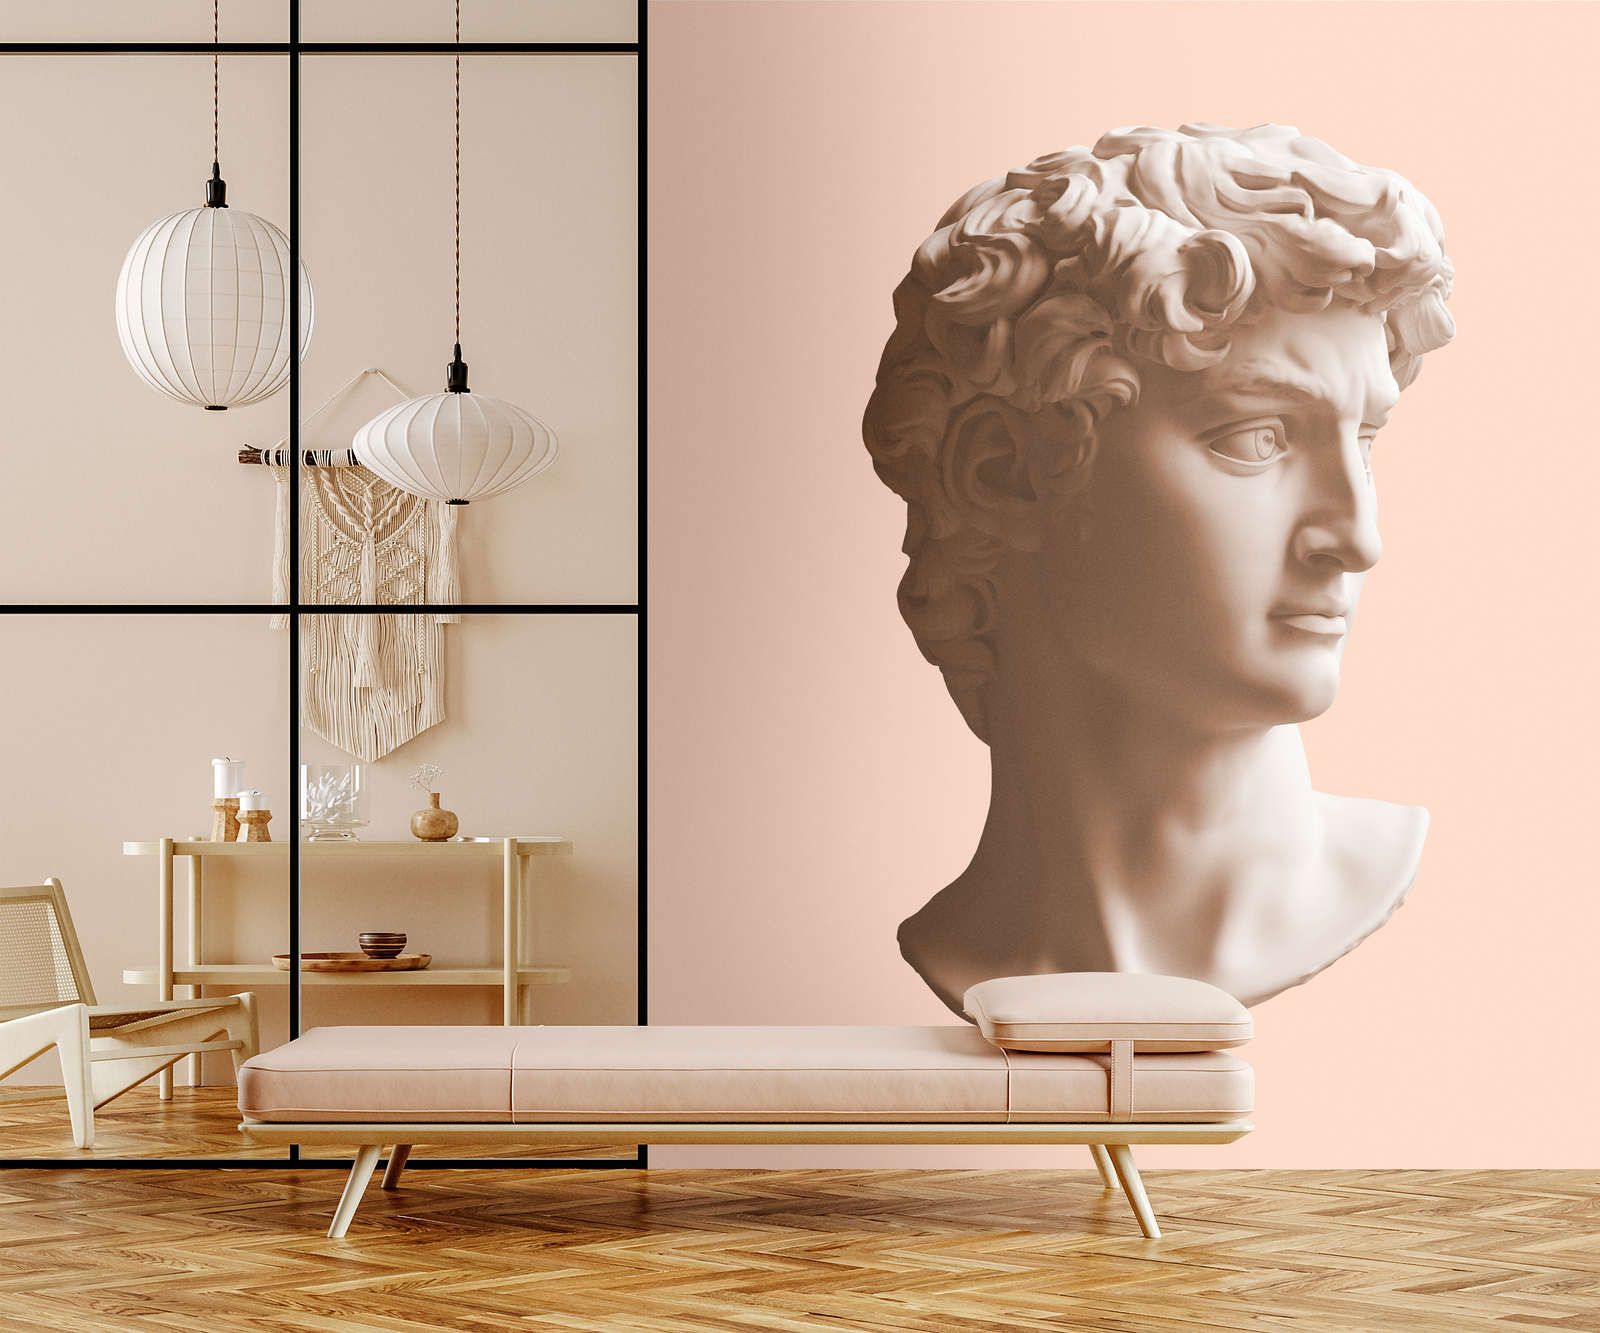             Photo wallpaper »mars« - antique male bust - Smooth, slightly pearly shimmering non-woven fabric
        